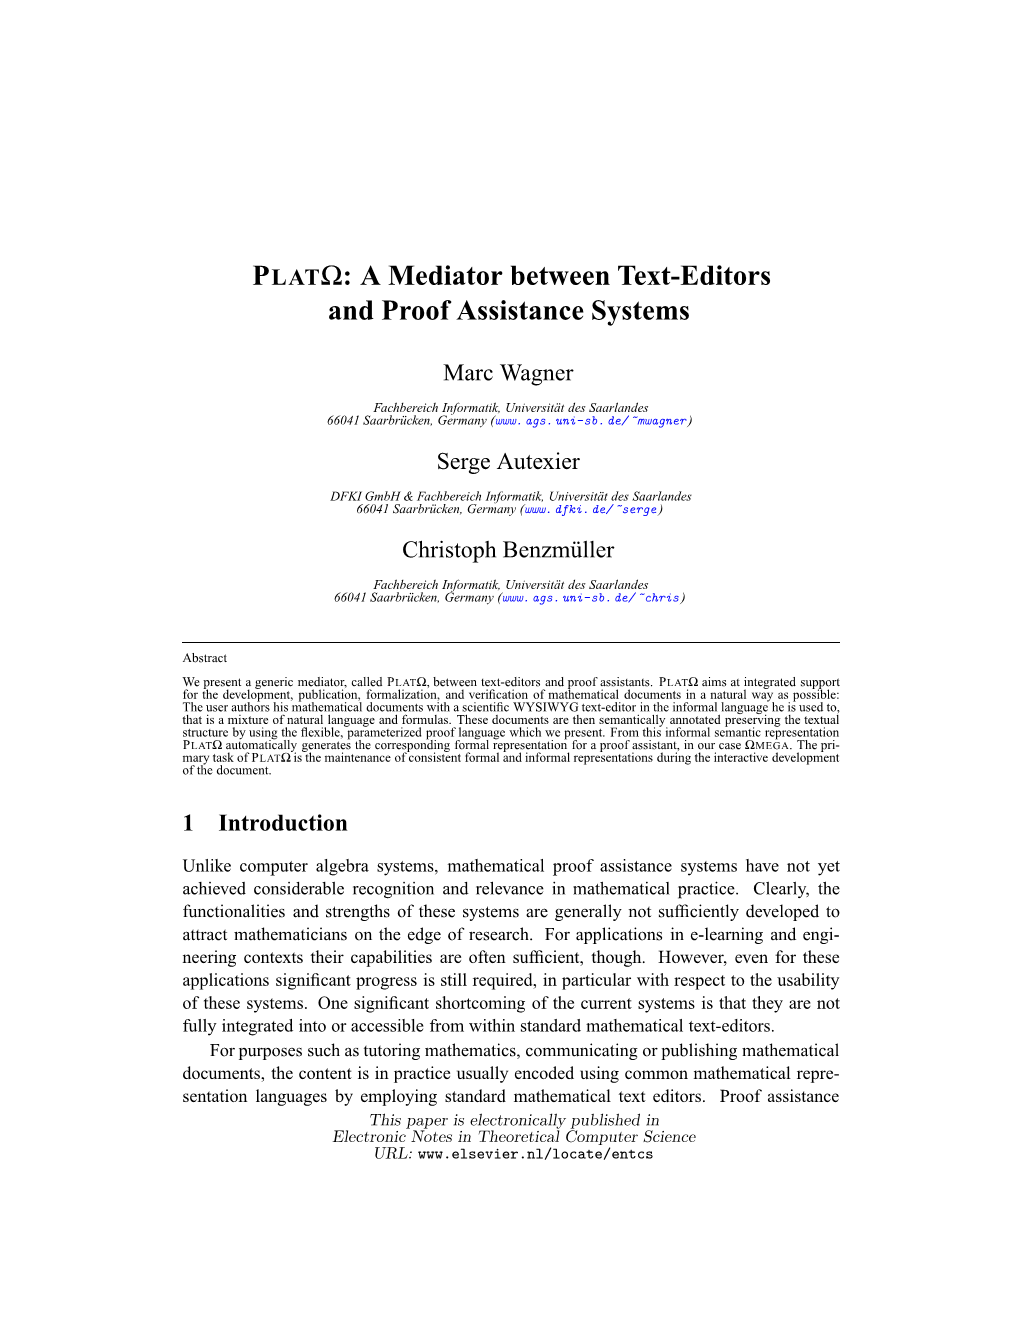 A Mediator Between Text-Editors and Proof Assistance Systems